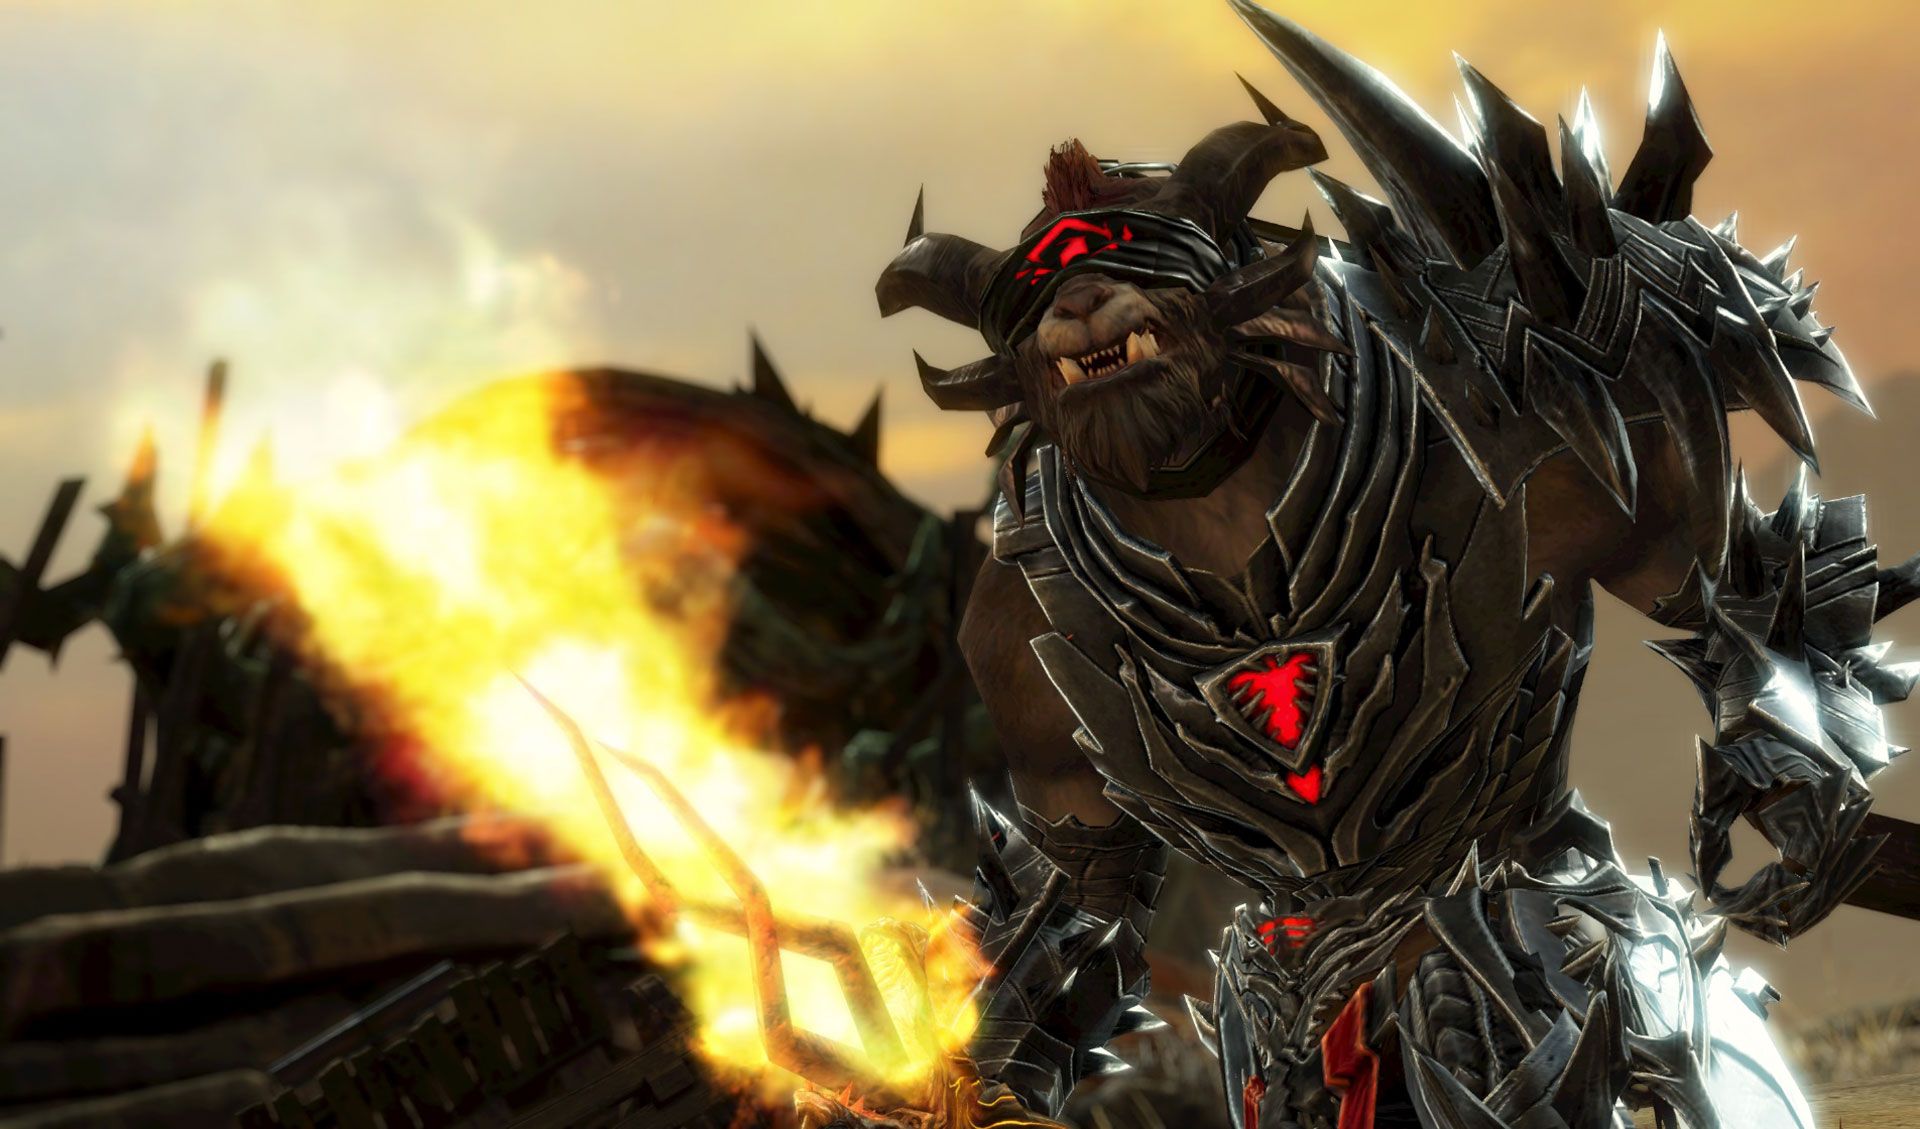 guild wars 2 free now